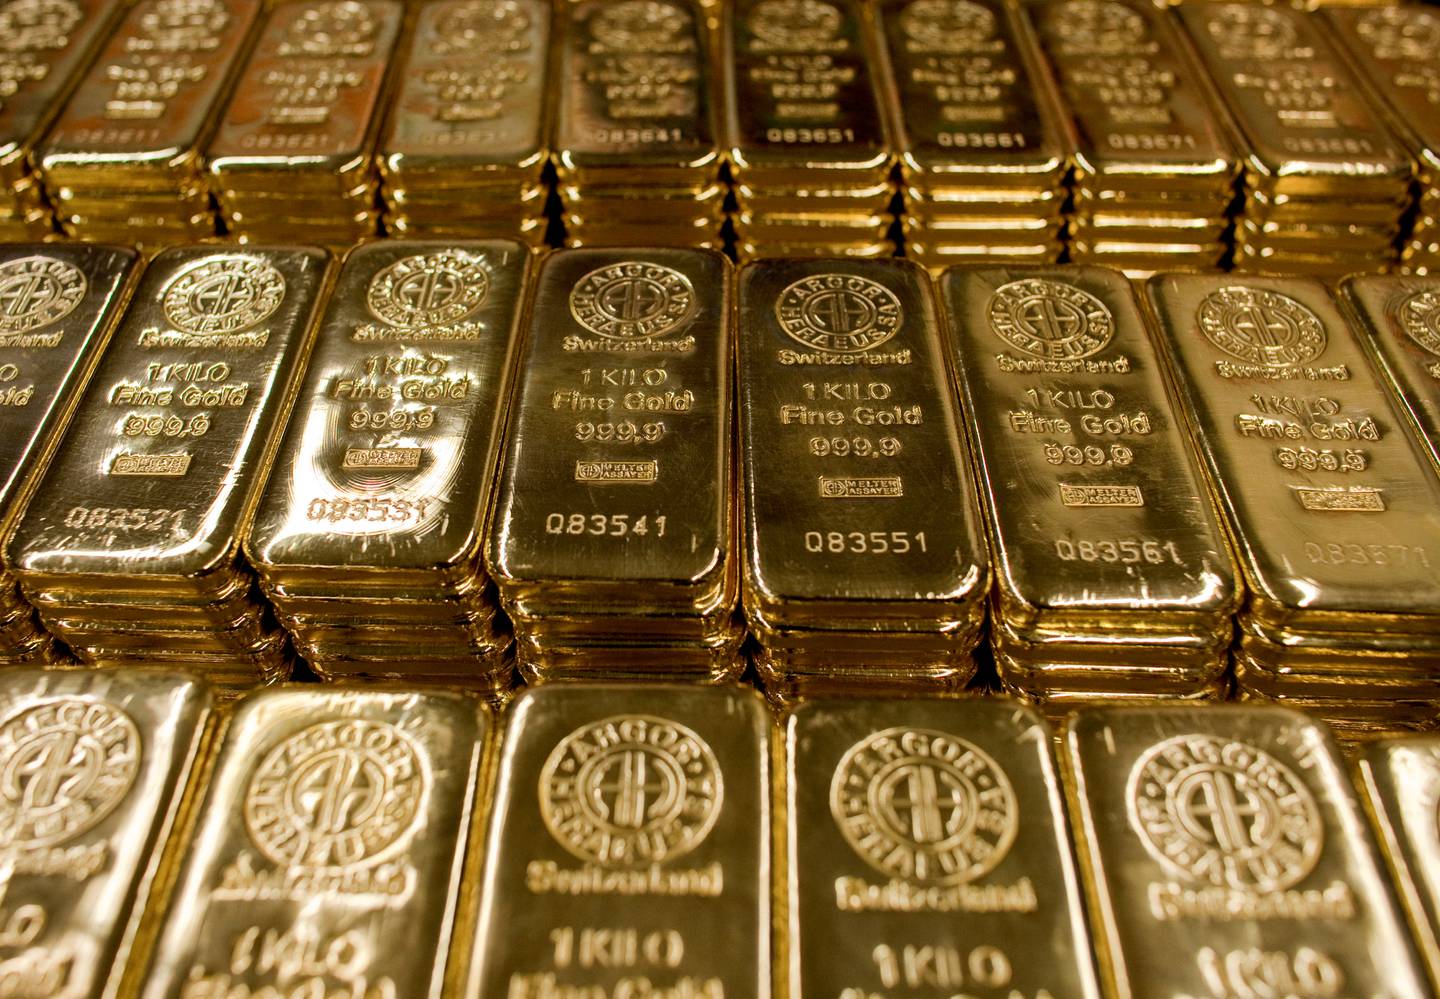 FILE PHOTO: Gold bars of one kilogram are placed on a table at a plant of gold refiner and bar manufacturer Argor-Heraeus SA in the southern Swiss town of Mendrisio, March 1, 2012. REUTERS/Pascal Lauener/File Photo